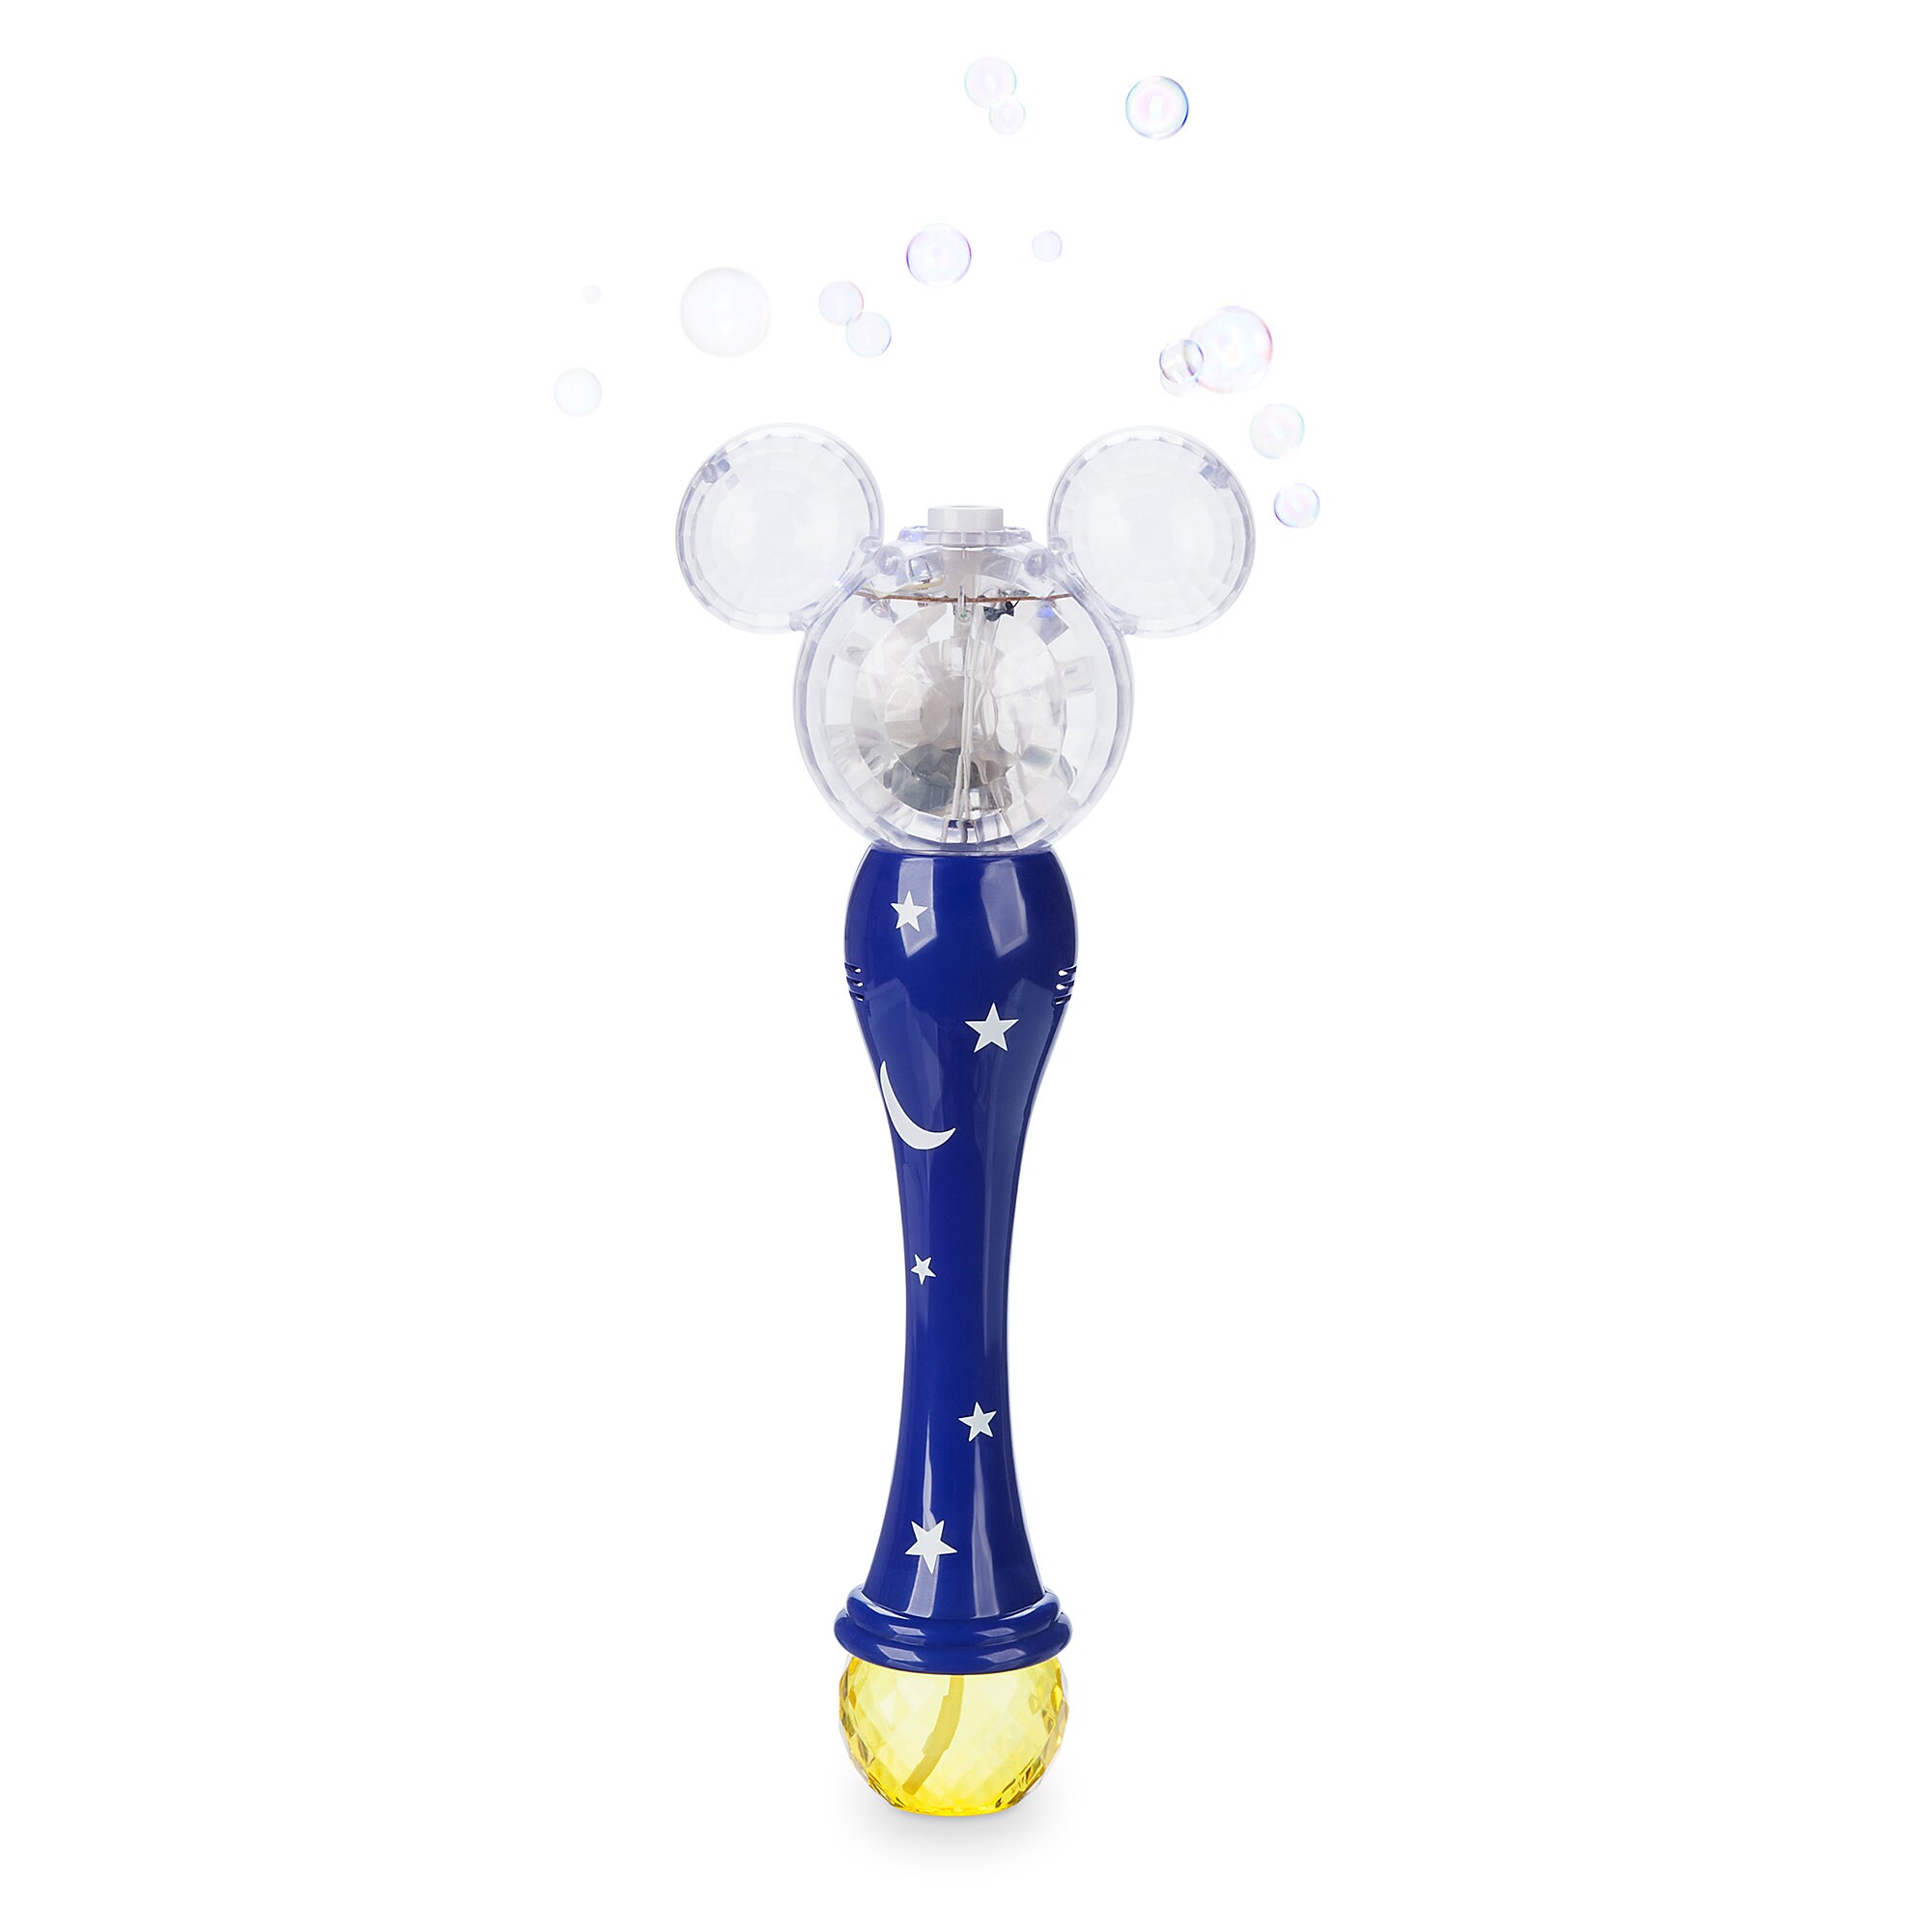 Sorcerer Mickey Mouse Light-Up Bubble Wand  - Fantasia